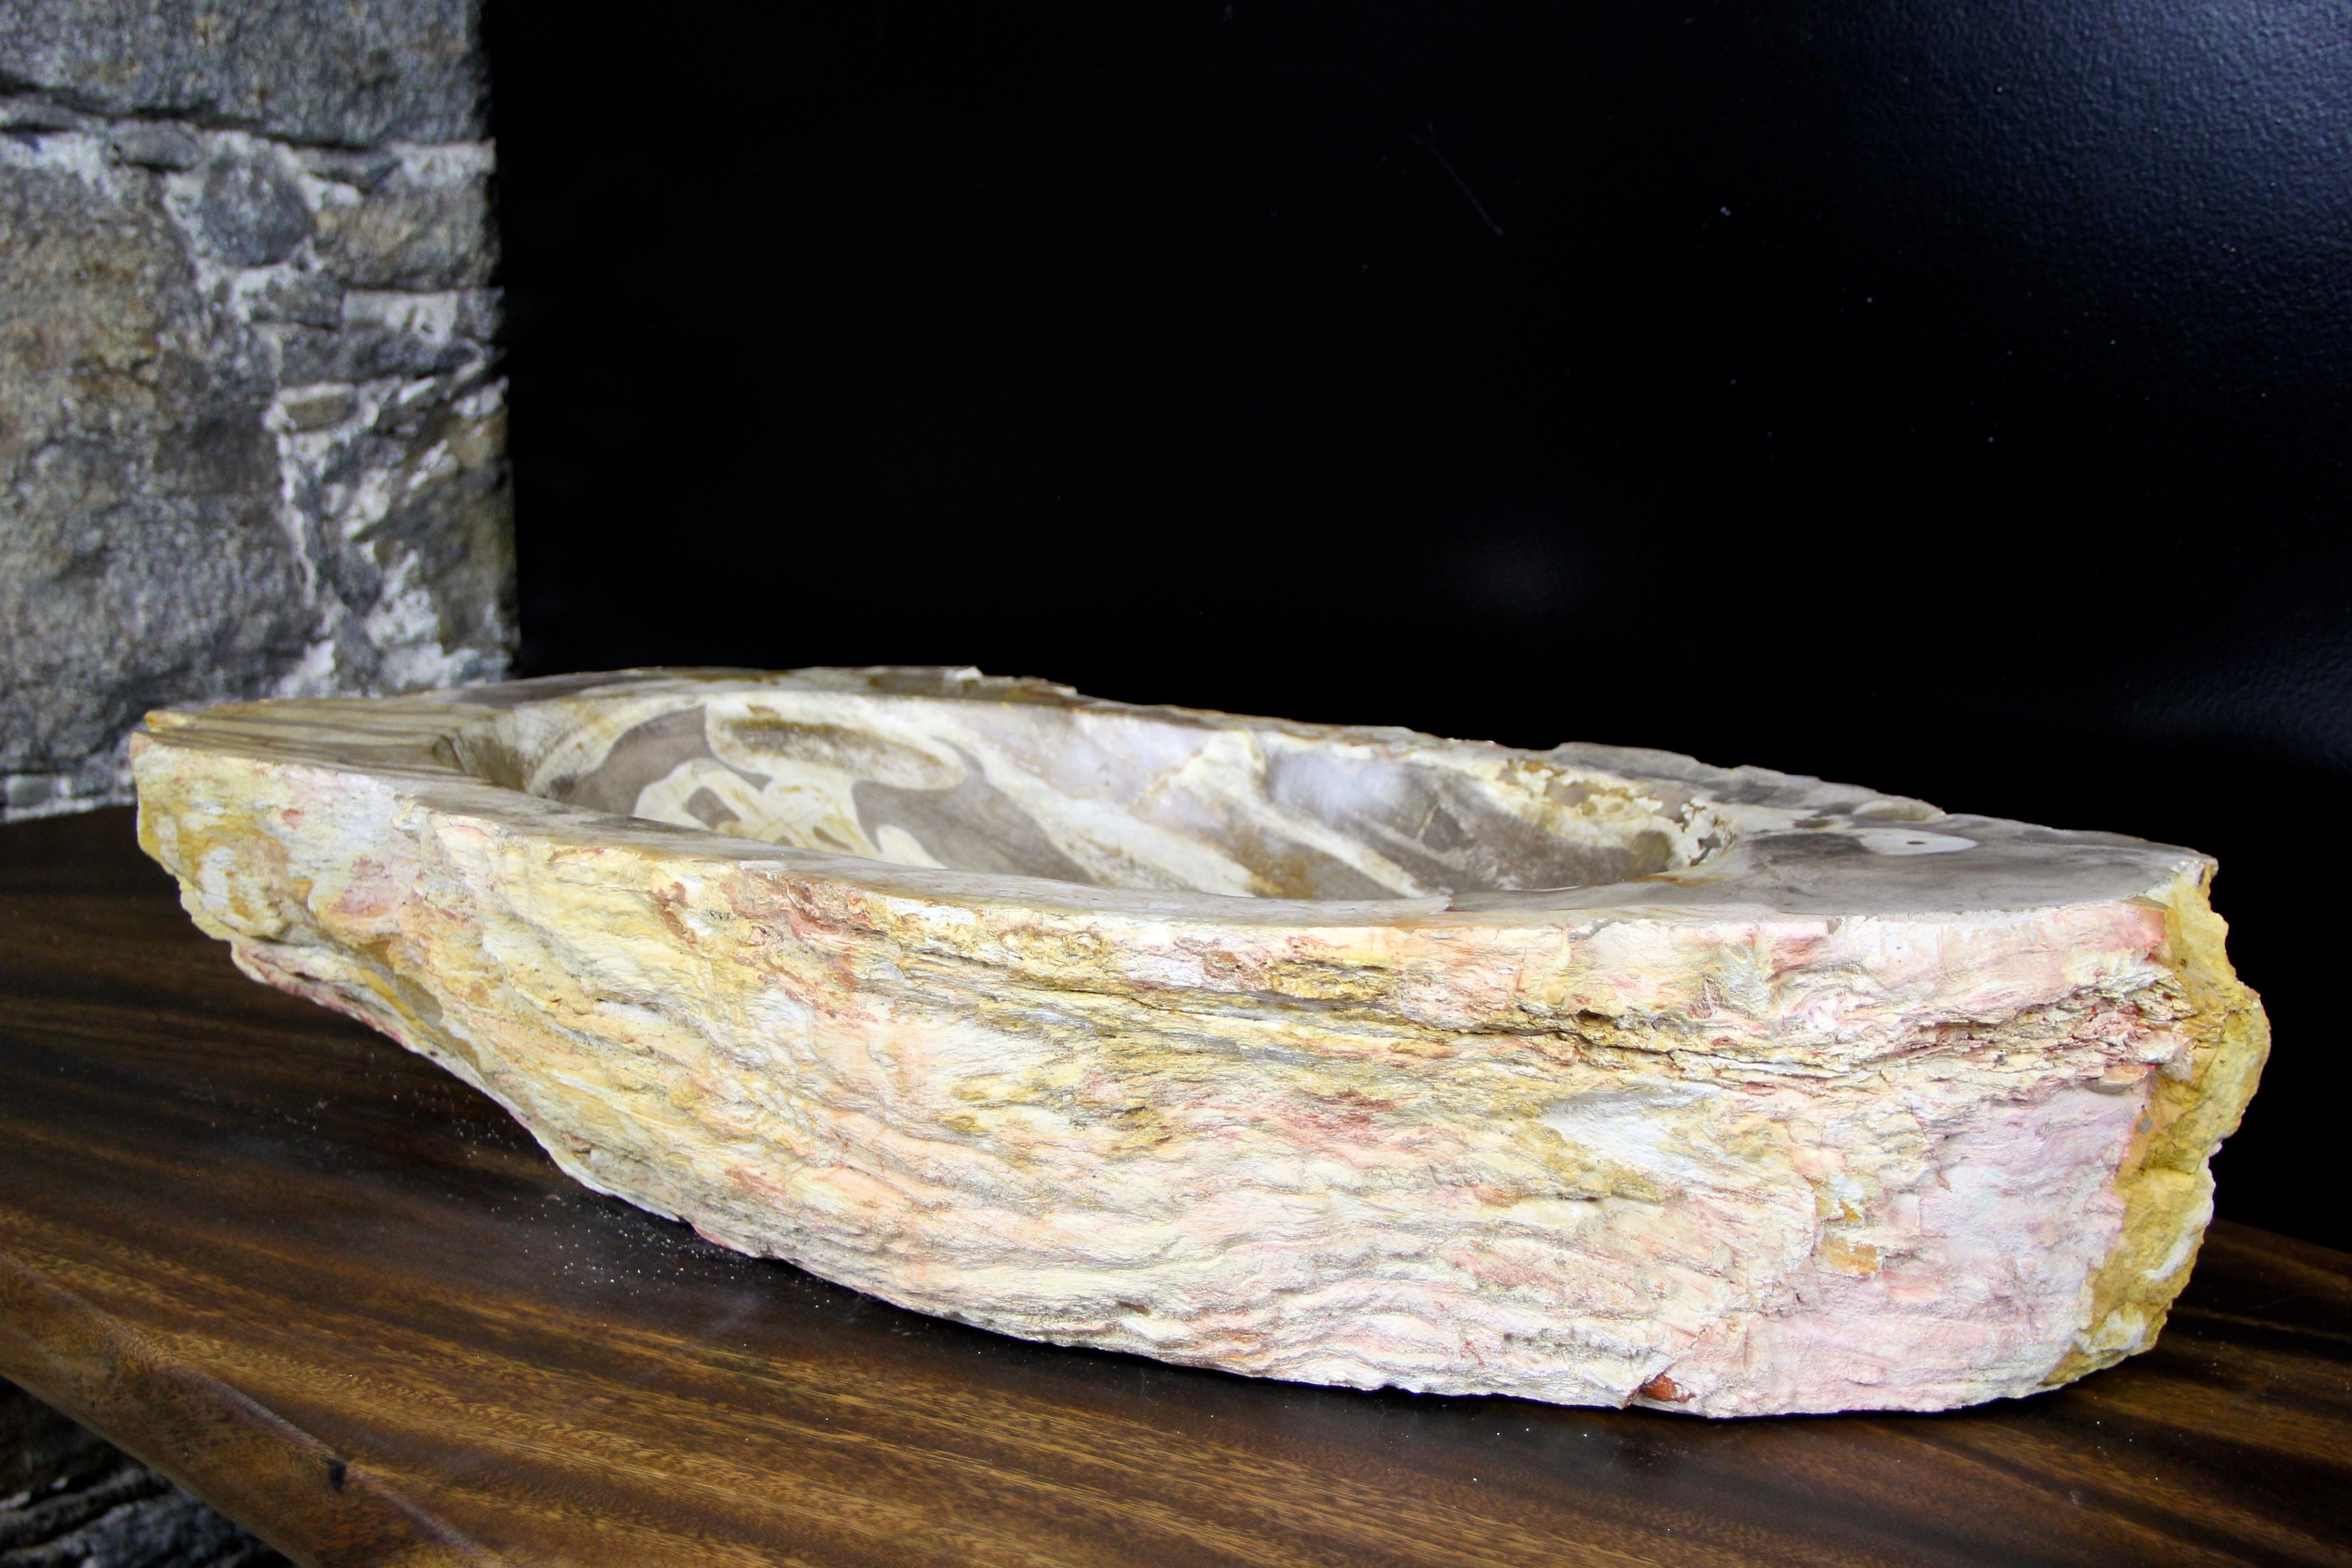 Unique petrified wood sink in absolute top quality. This elongated sink impresses with a beautiful shape and has been polished on the inside while the outside shows the still original fossil tree look colored in gorgeous beige, grey and red tones.